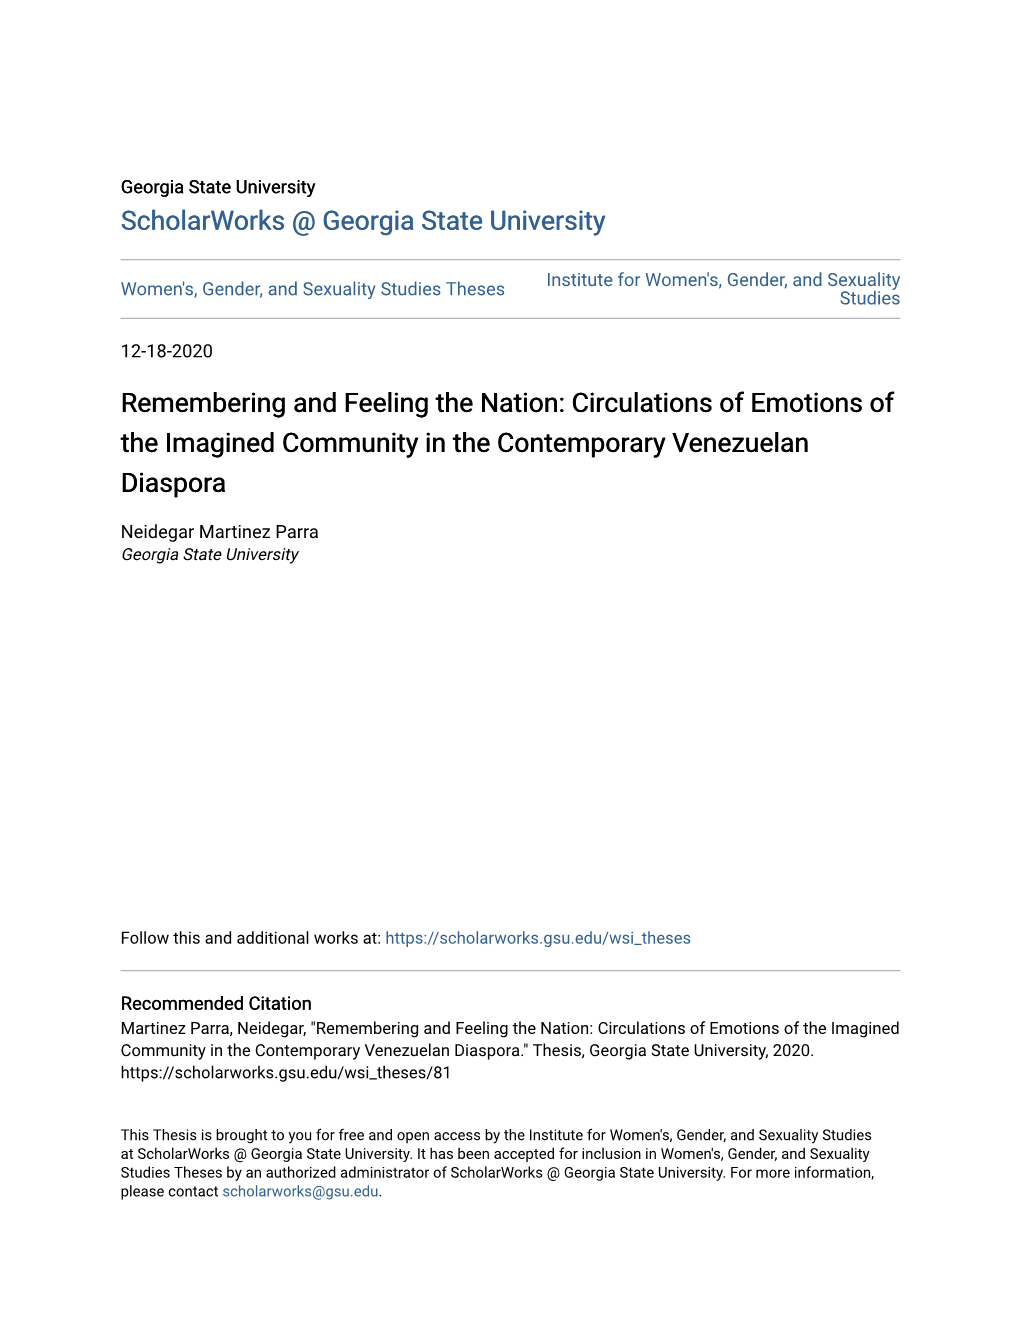 Remembering and Feeling the Nation: Circulations of Emotions of the Imagined Community in the Contemporary Venezuelan Diaspora